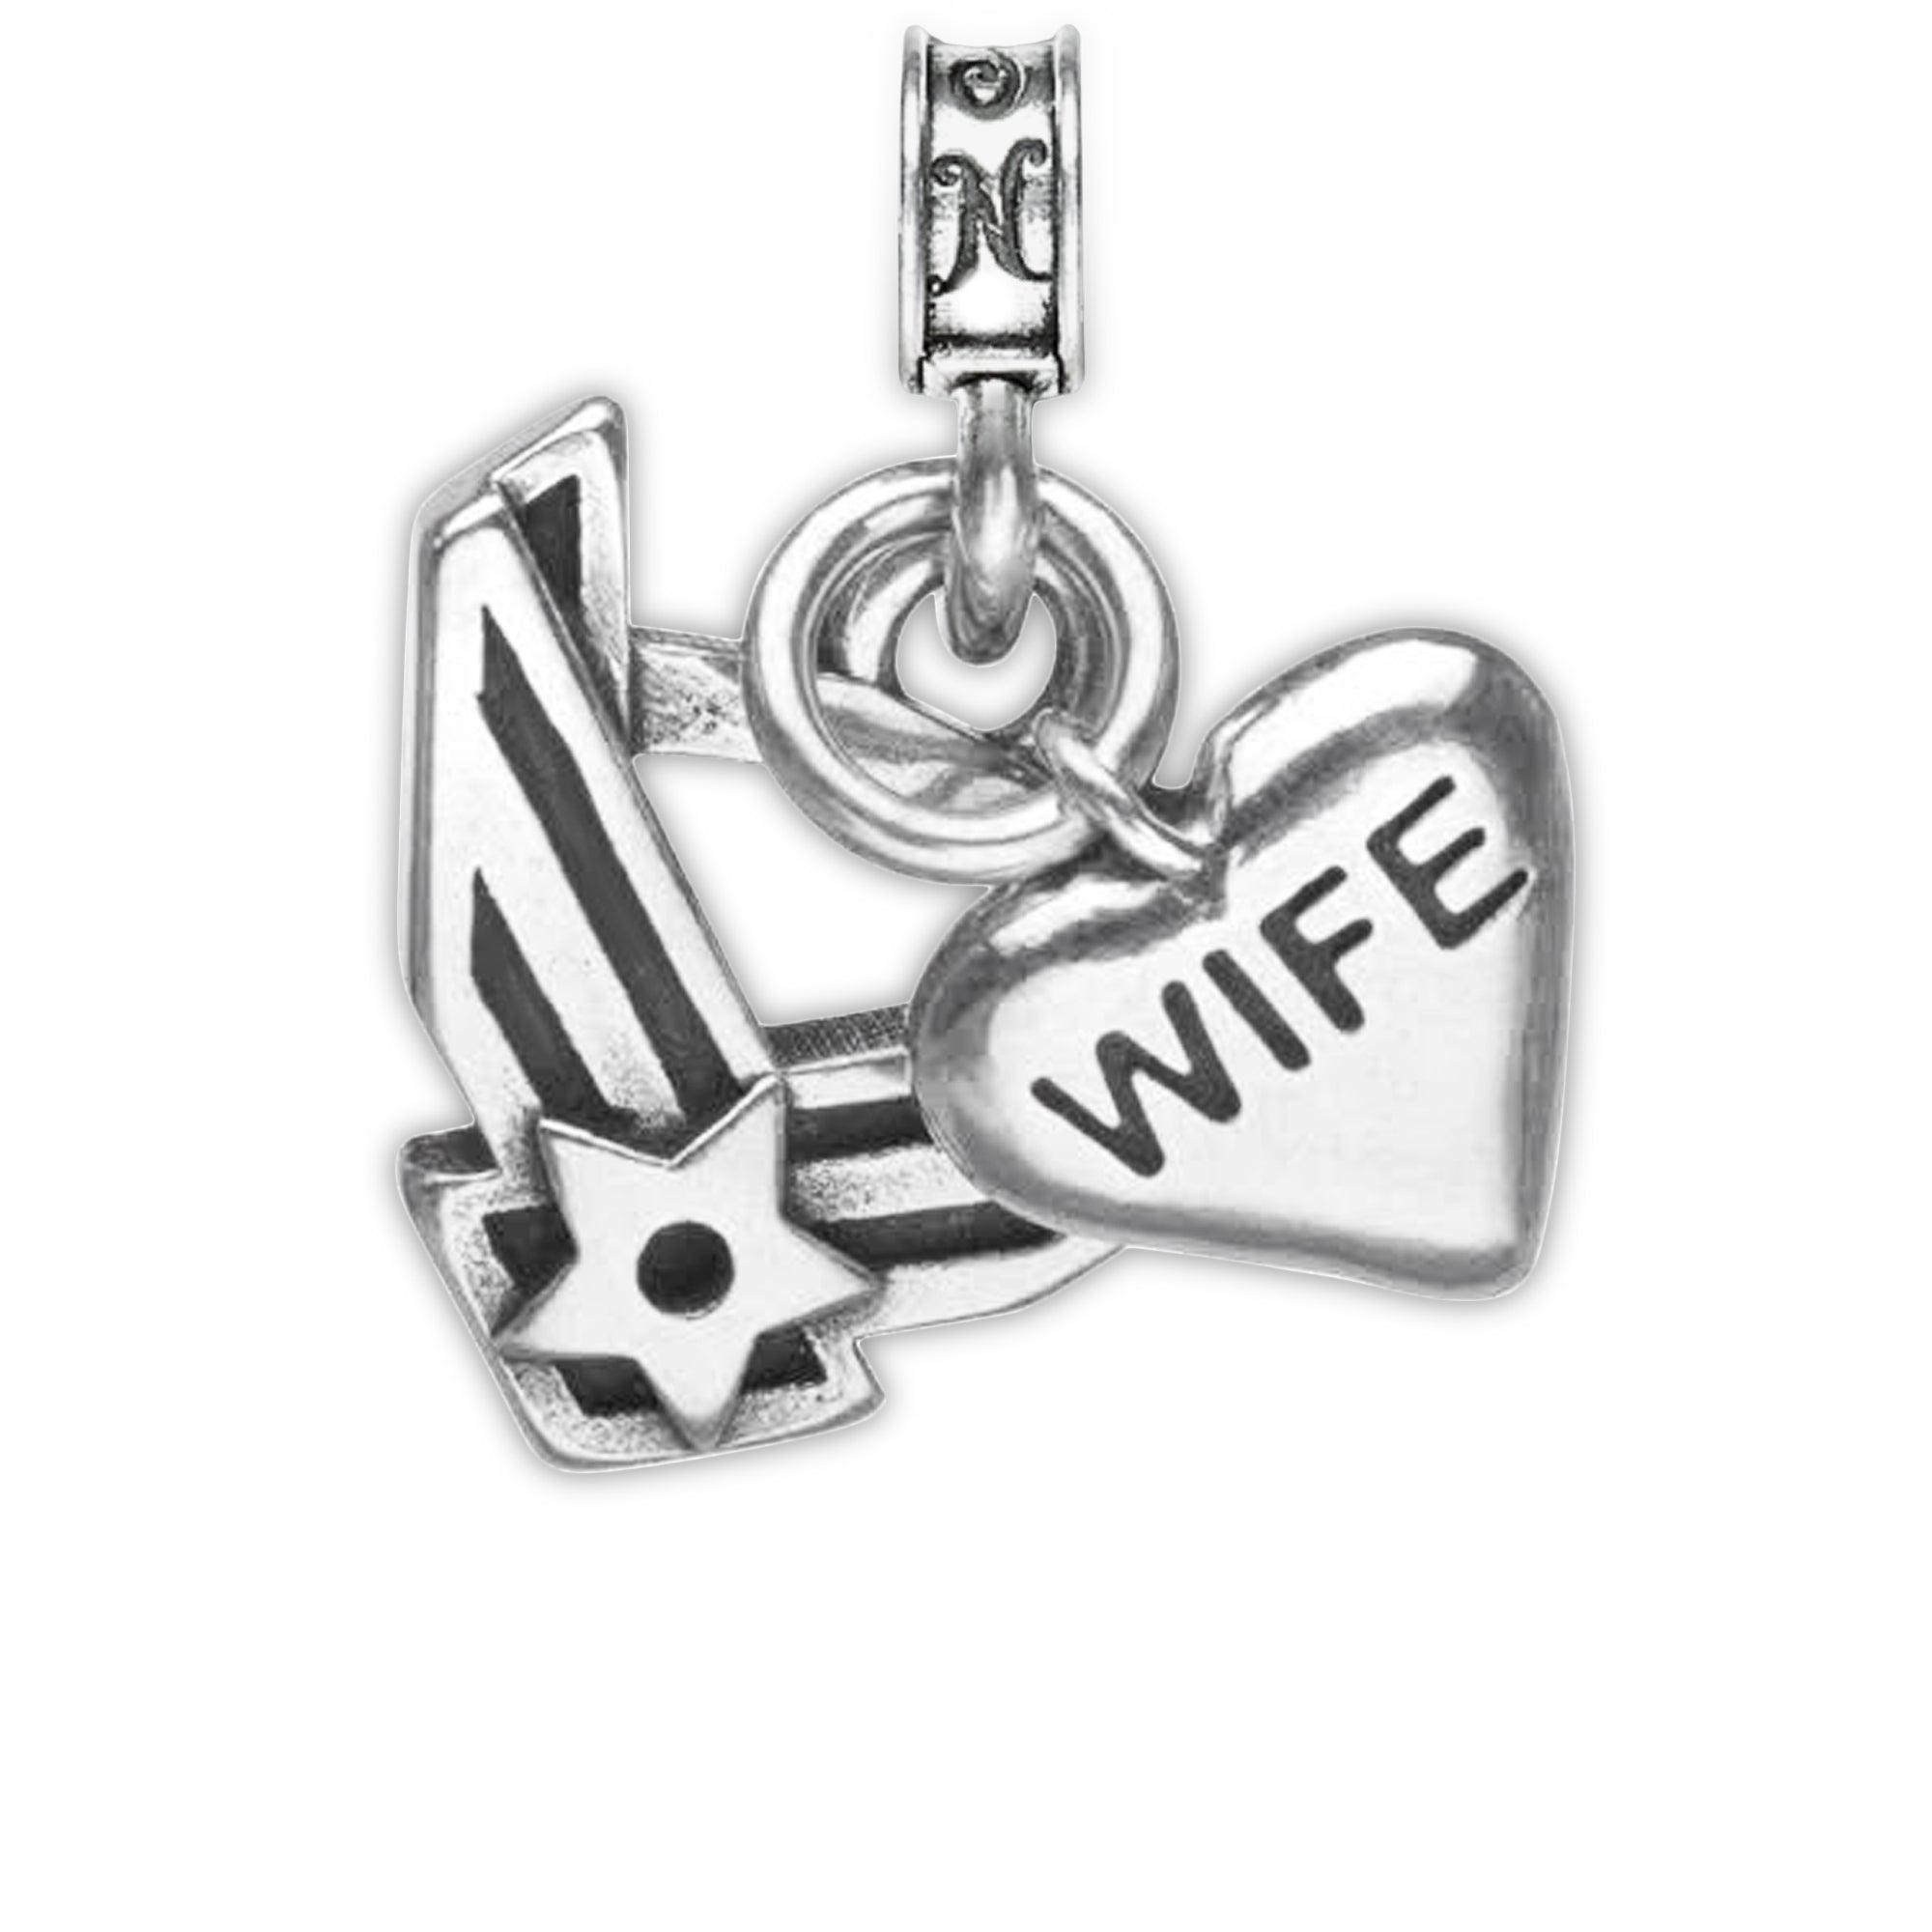 USAF Military Gift Military Charm Air Force Air Force Wife